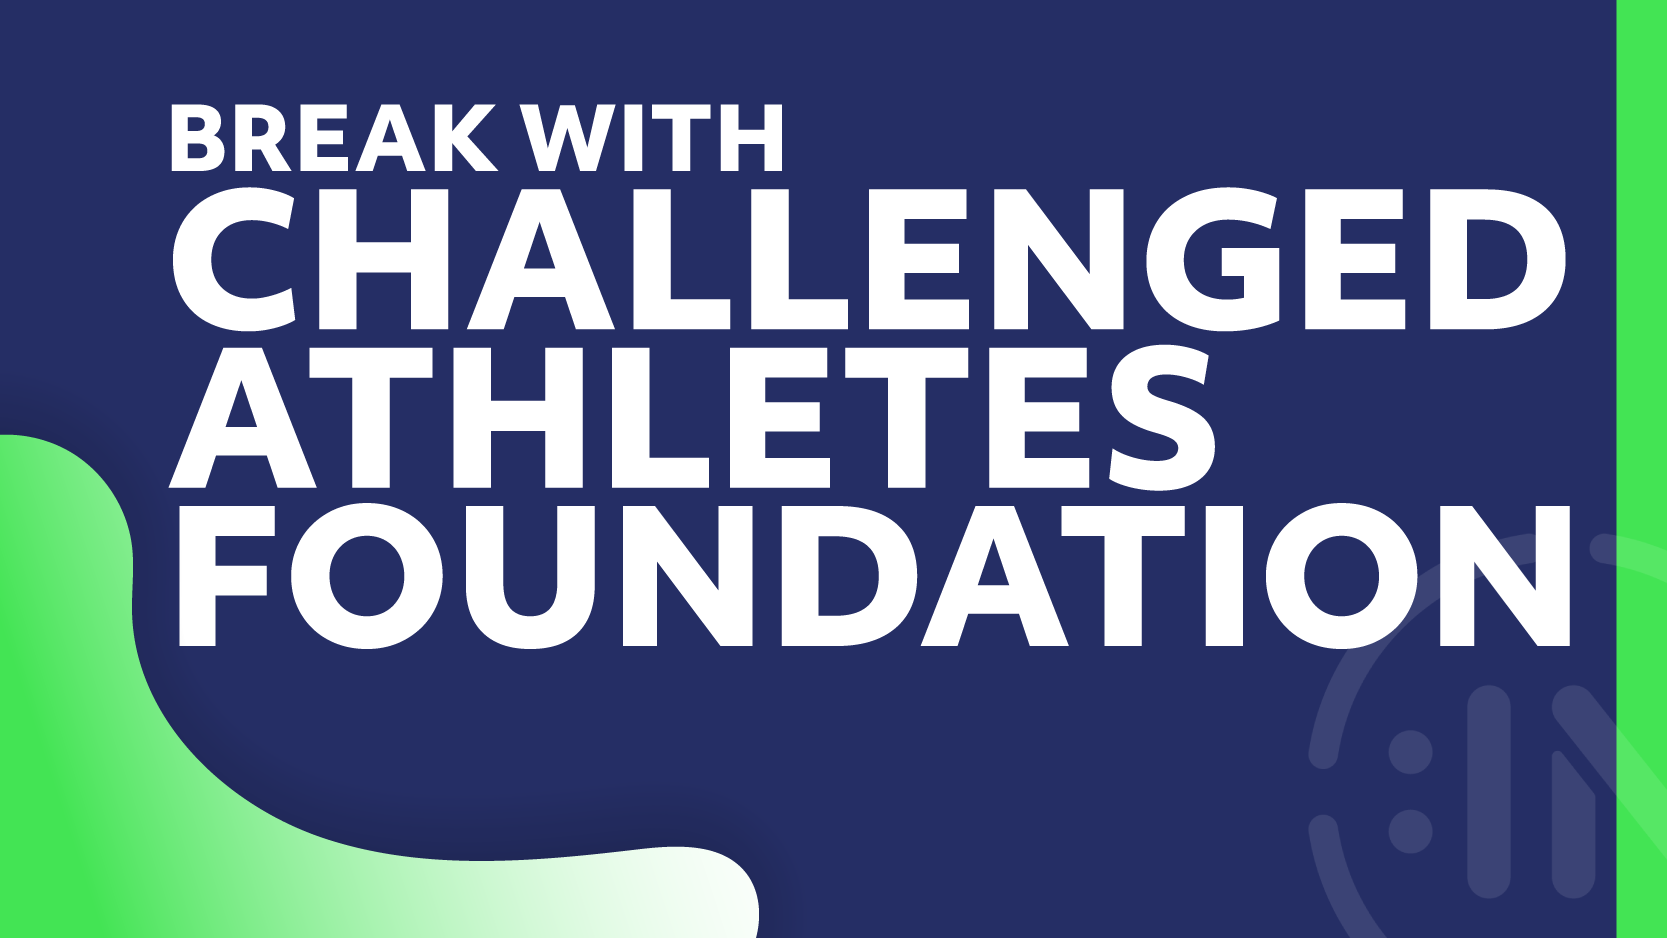 Break with Challenged Athletes Foundation